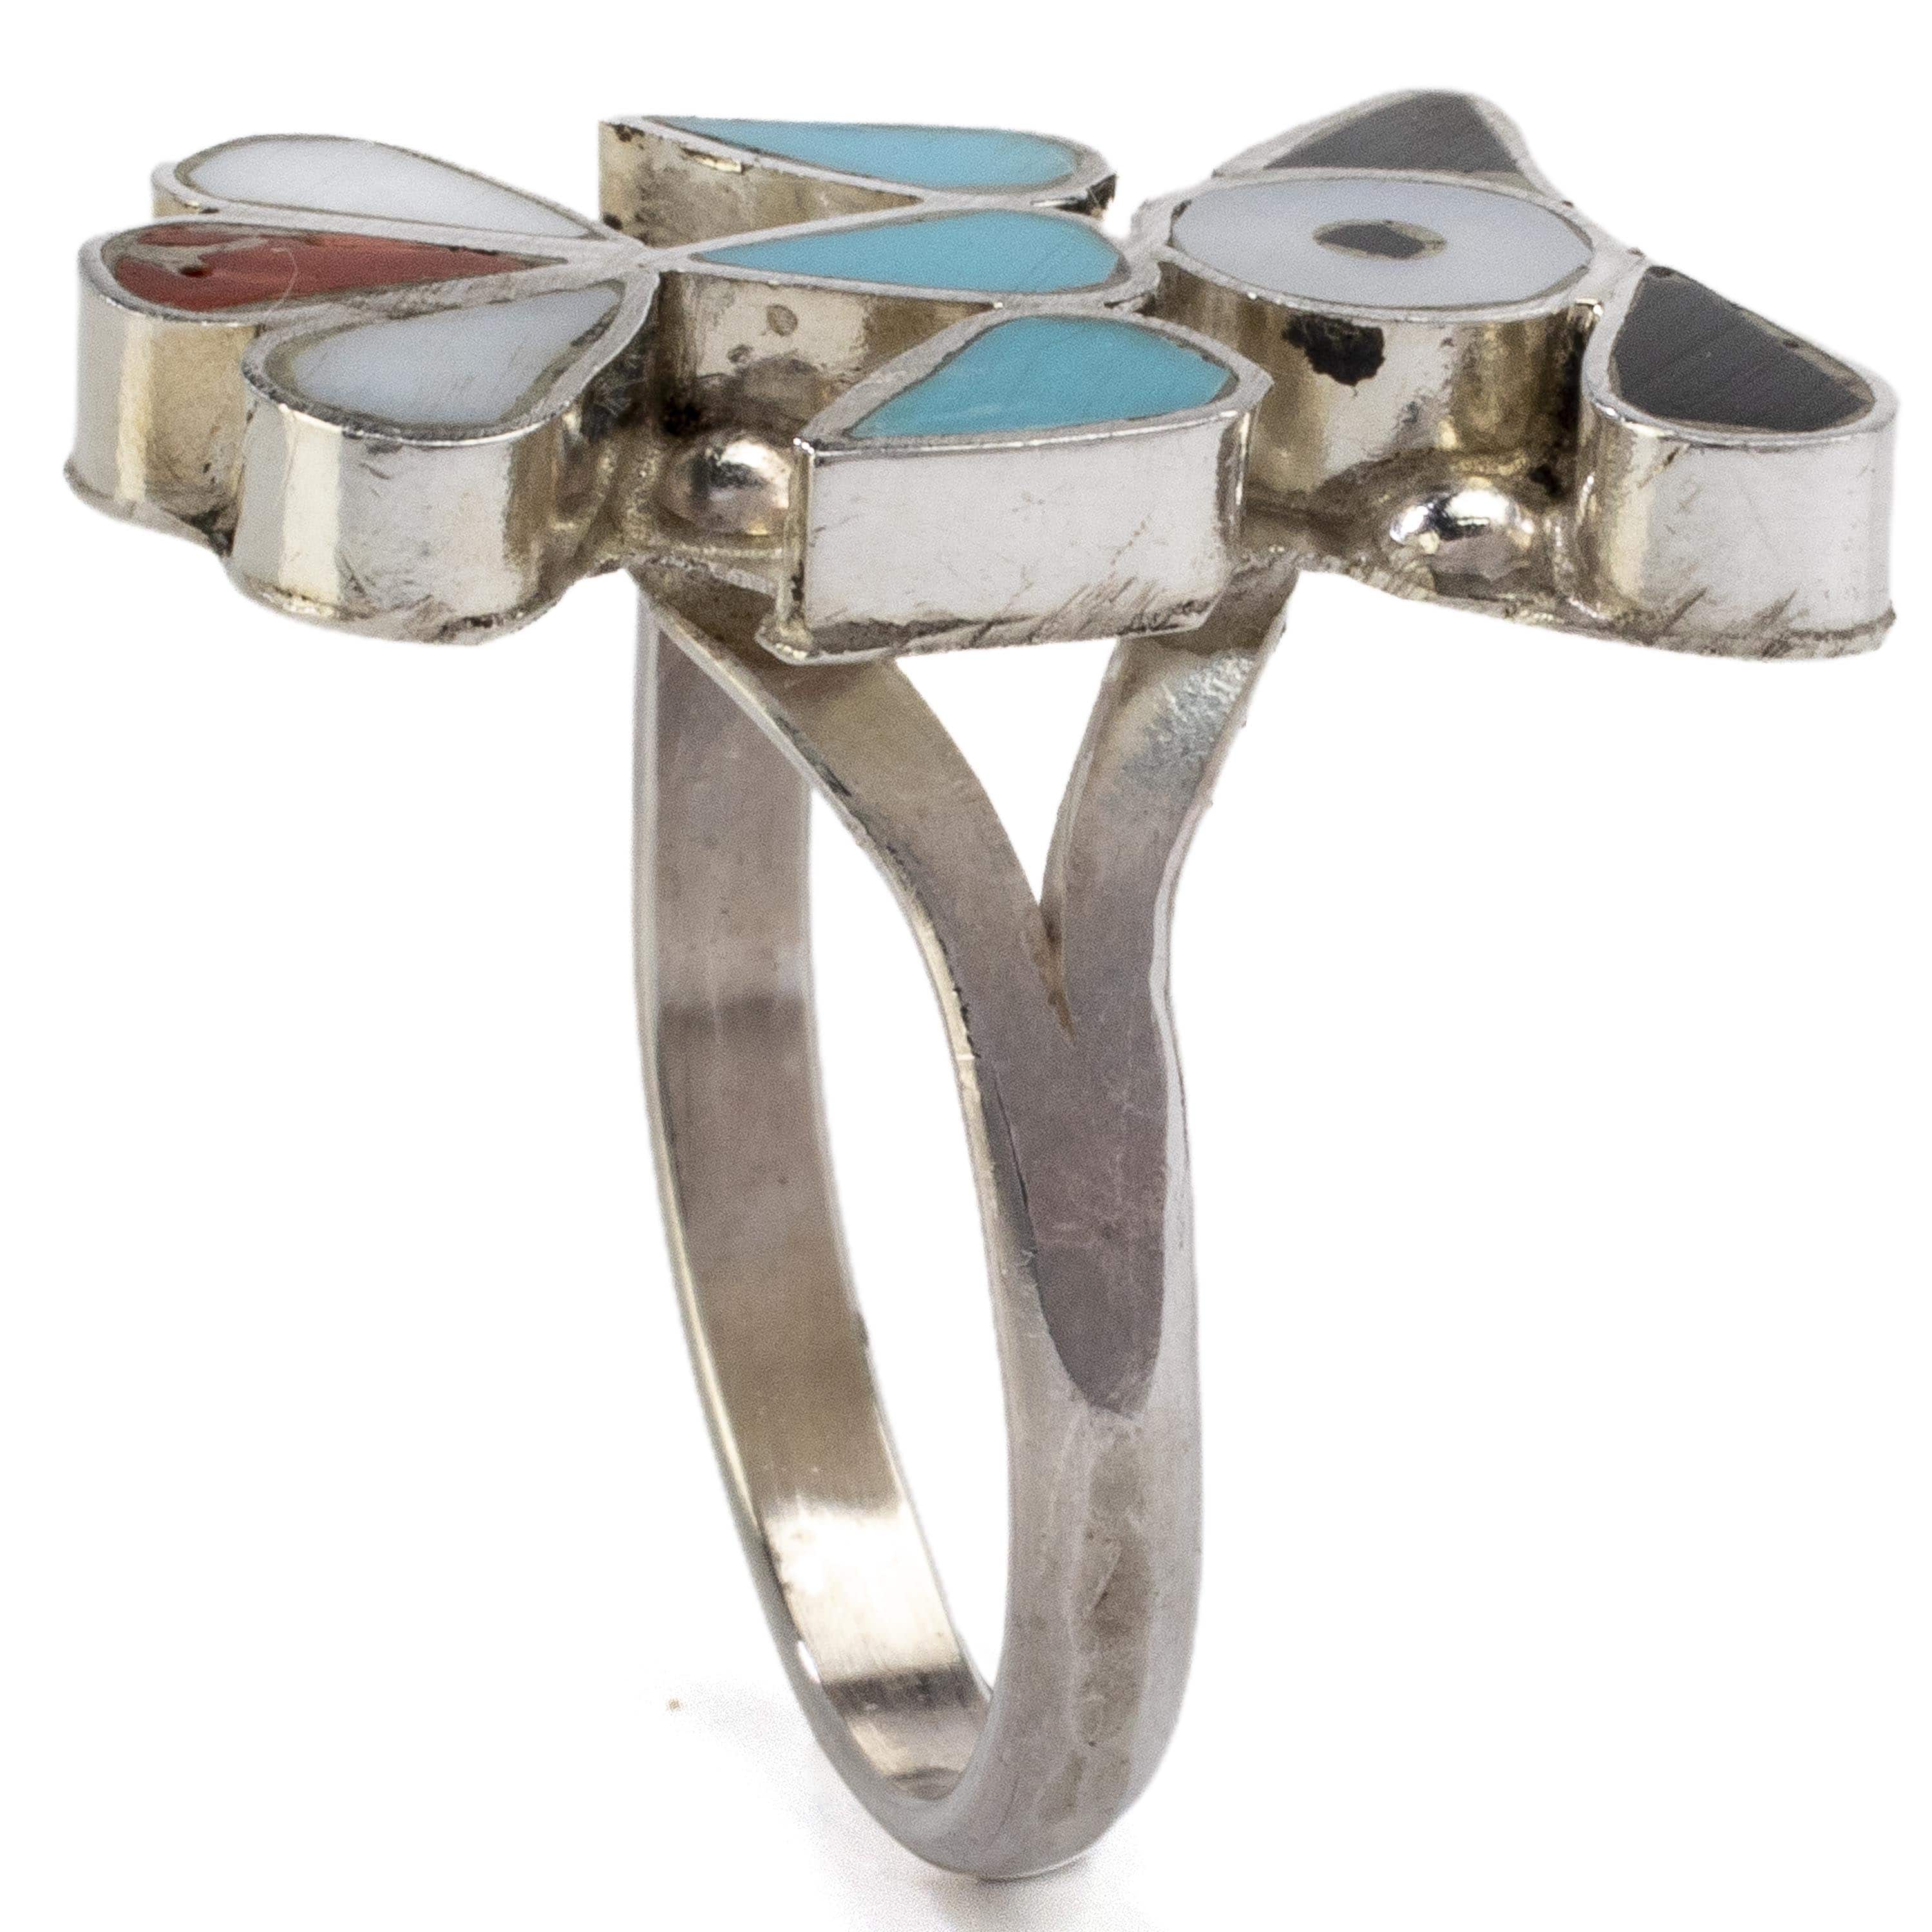 Kalifano Native American Jewelry 8 Pino Yunie Zuni Peyote Bird with Mother of Pearl, Black Onyx, Turquoise, and Coral USA Native American Made 925 Sterling Silver Ring NAR200.020.8